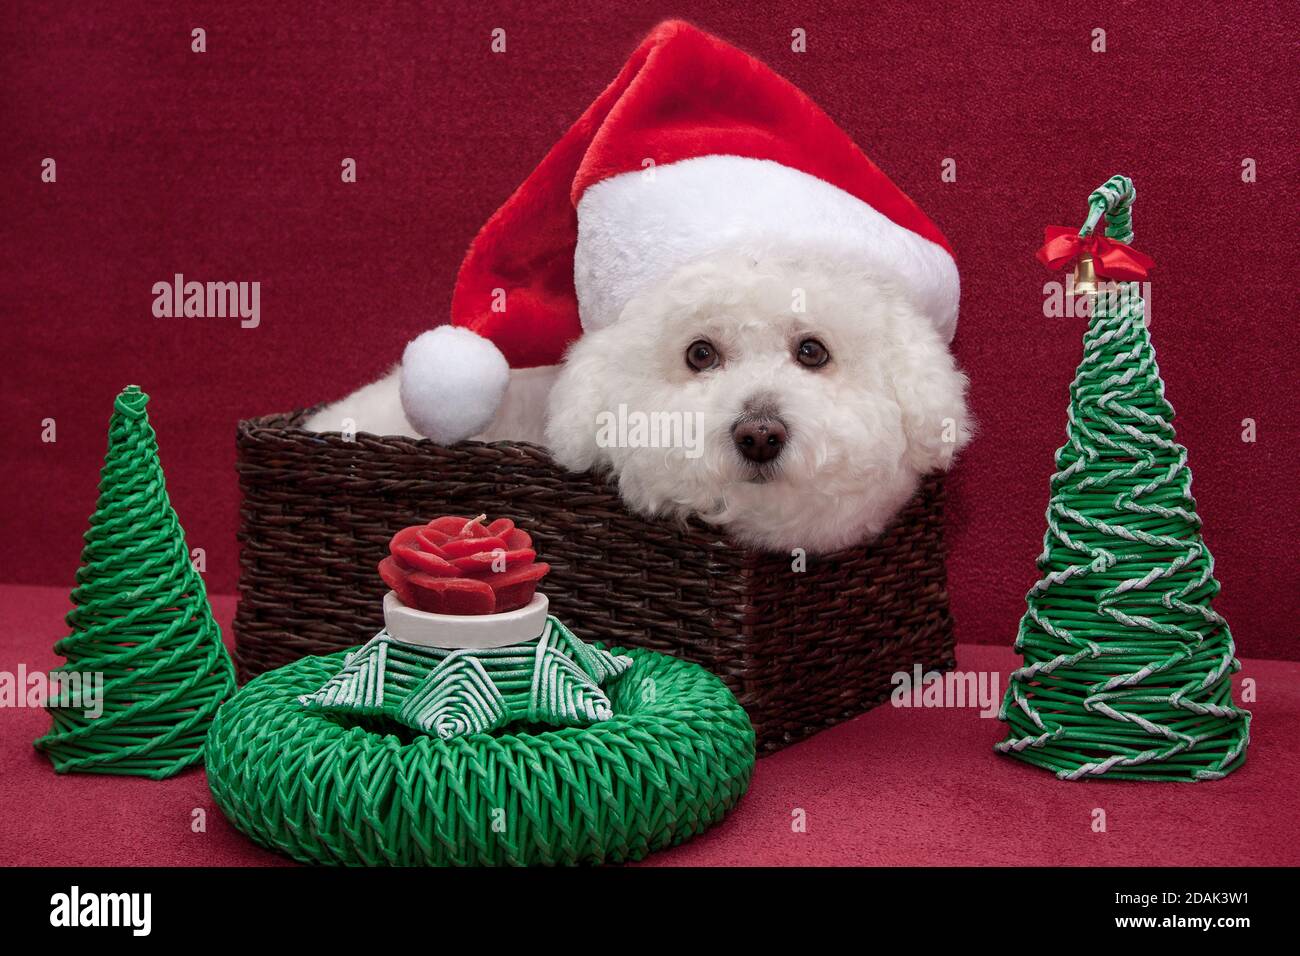 Cute bichon frise in santa claus hat is sitting in a wicker basket. Pet animals. Stock Photo